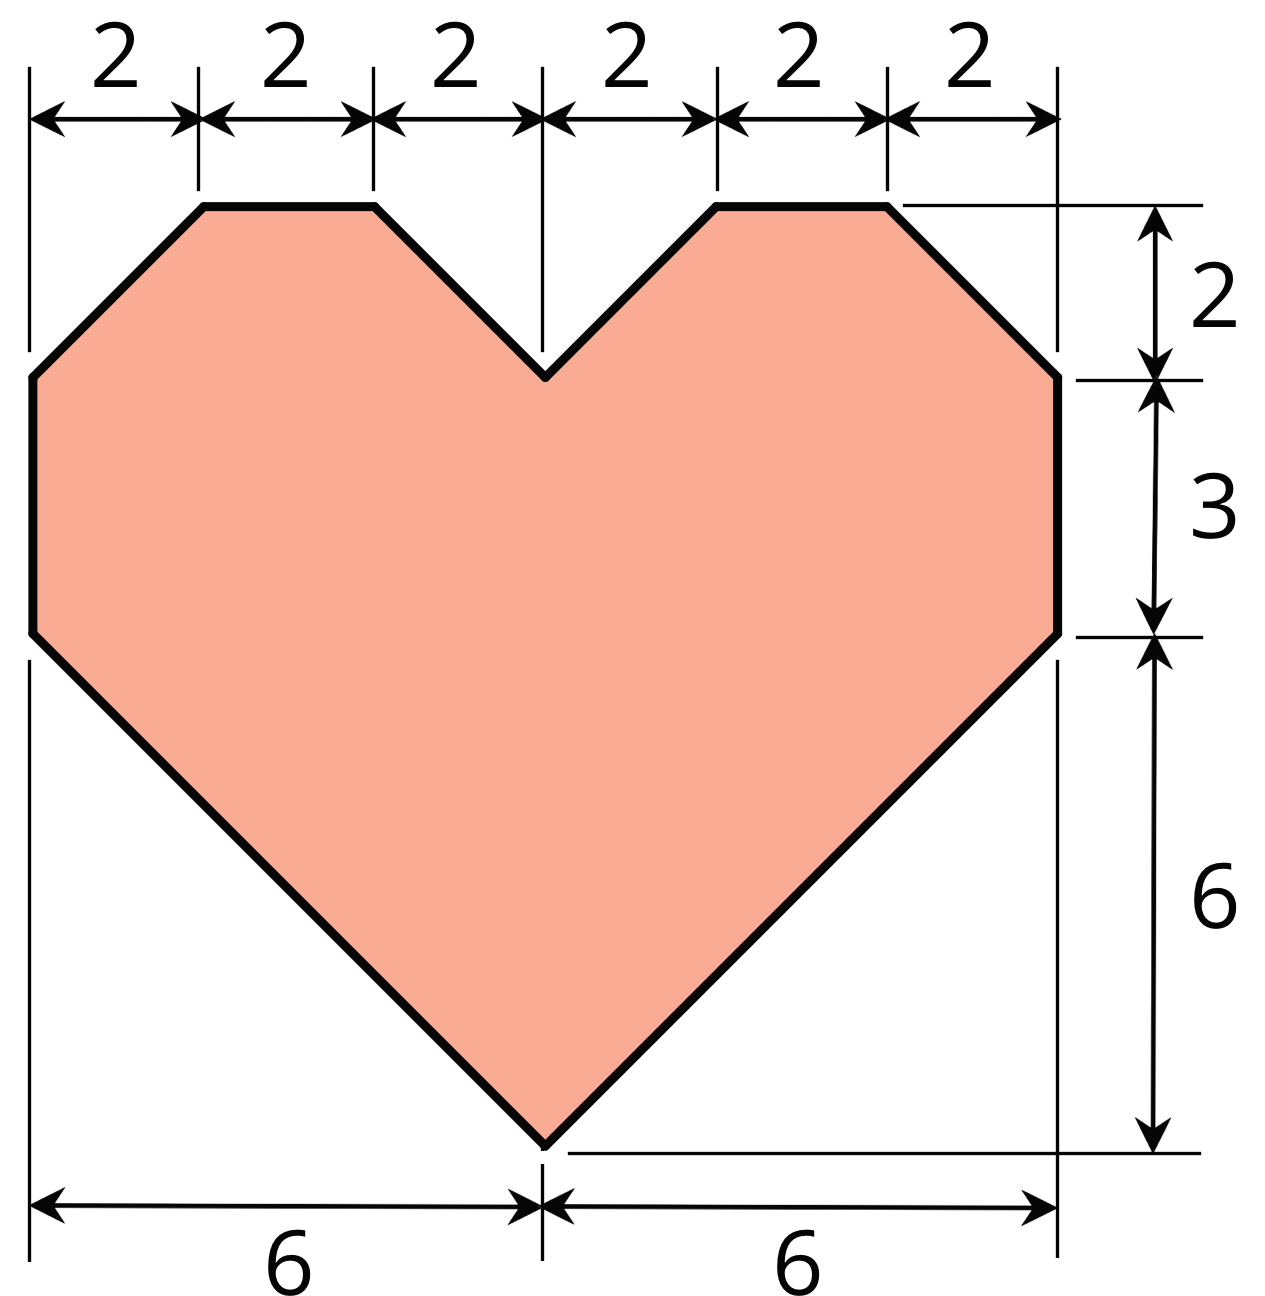 A heart-shaped polygon. Arrows along the bottom indicate the width of each half of the polygon is 6. Arrows along the top indicate that each of the six sides at the top span 2 units. Arrows along the right side indicate that the top portion of the polygon is 2 units, the middle portion is 3 units, and the bottom portion is 6 units.